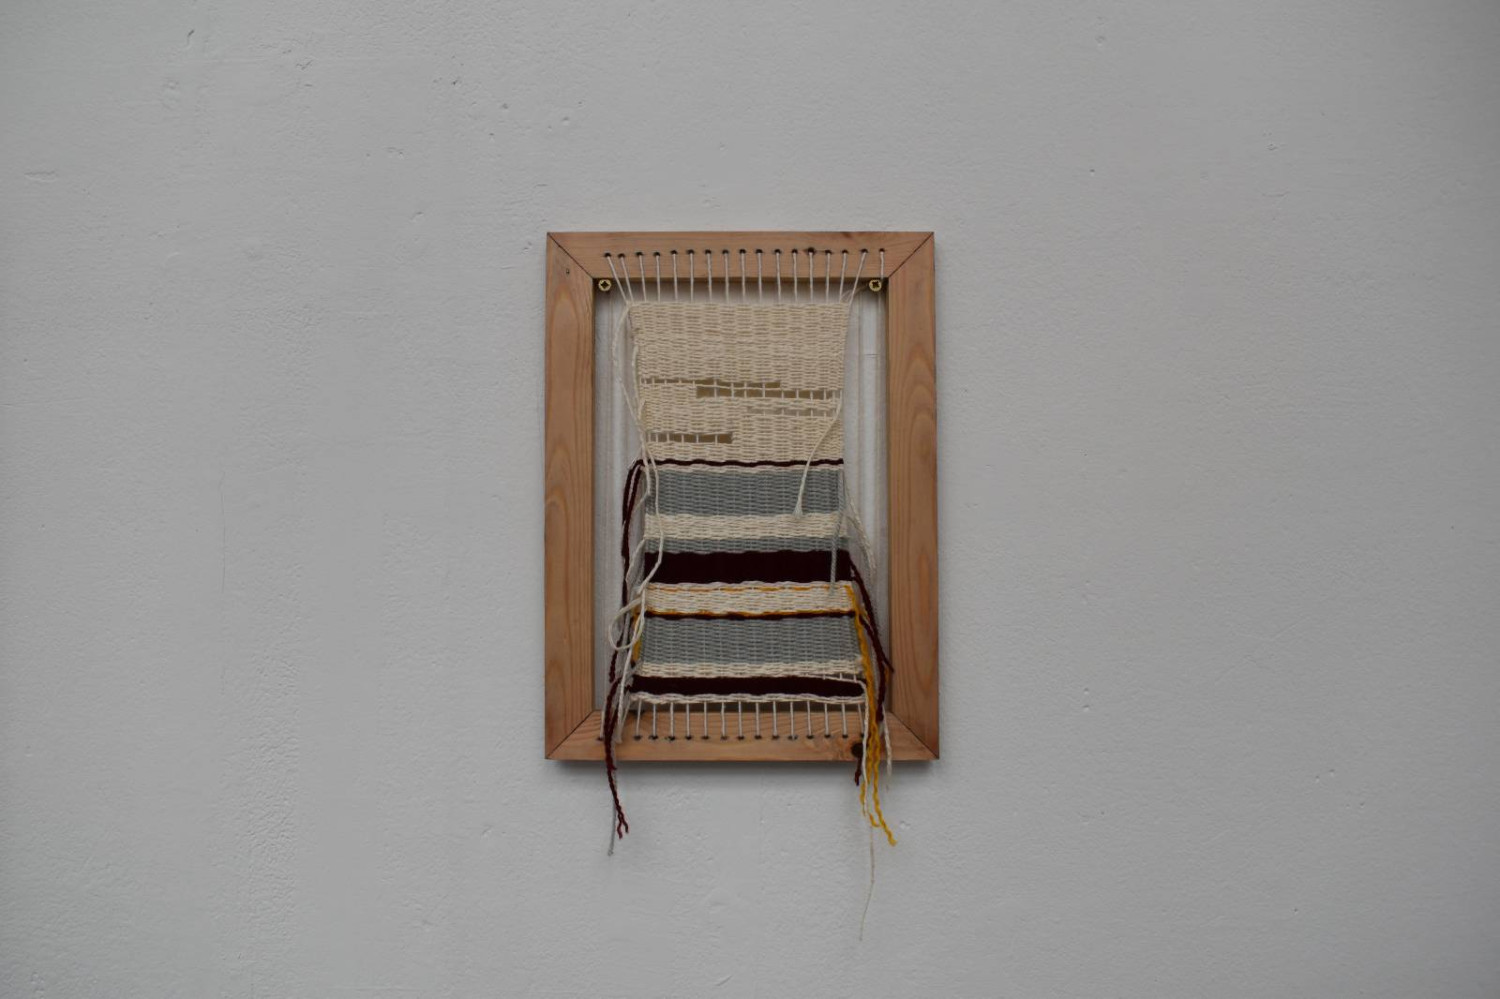 *1 and 3 looms*, synthetic cotton on wooden frame, 32 x 23cm